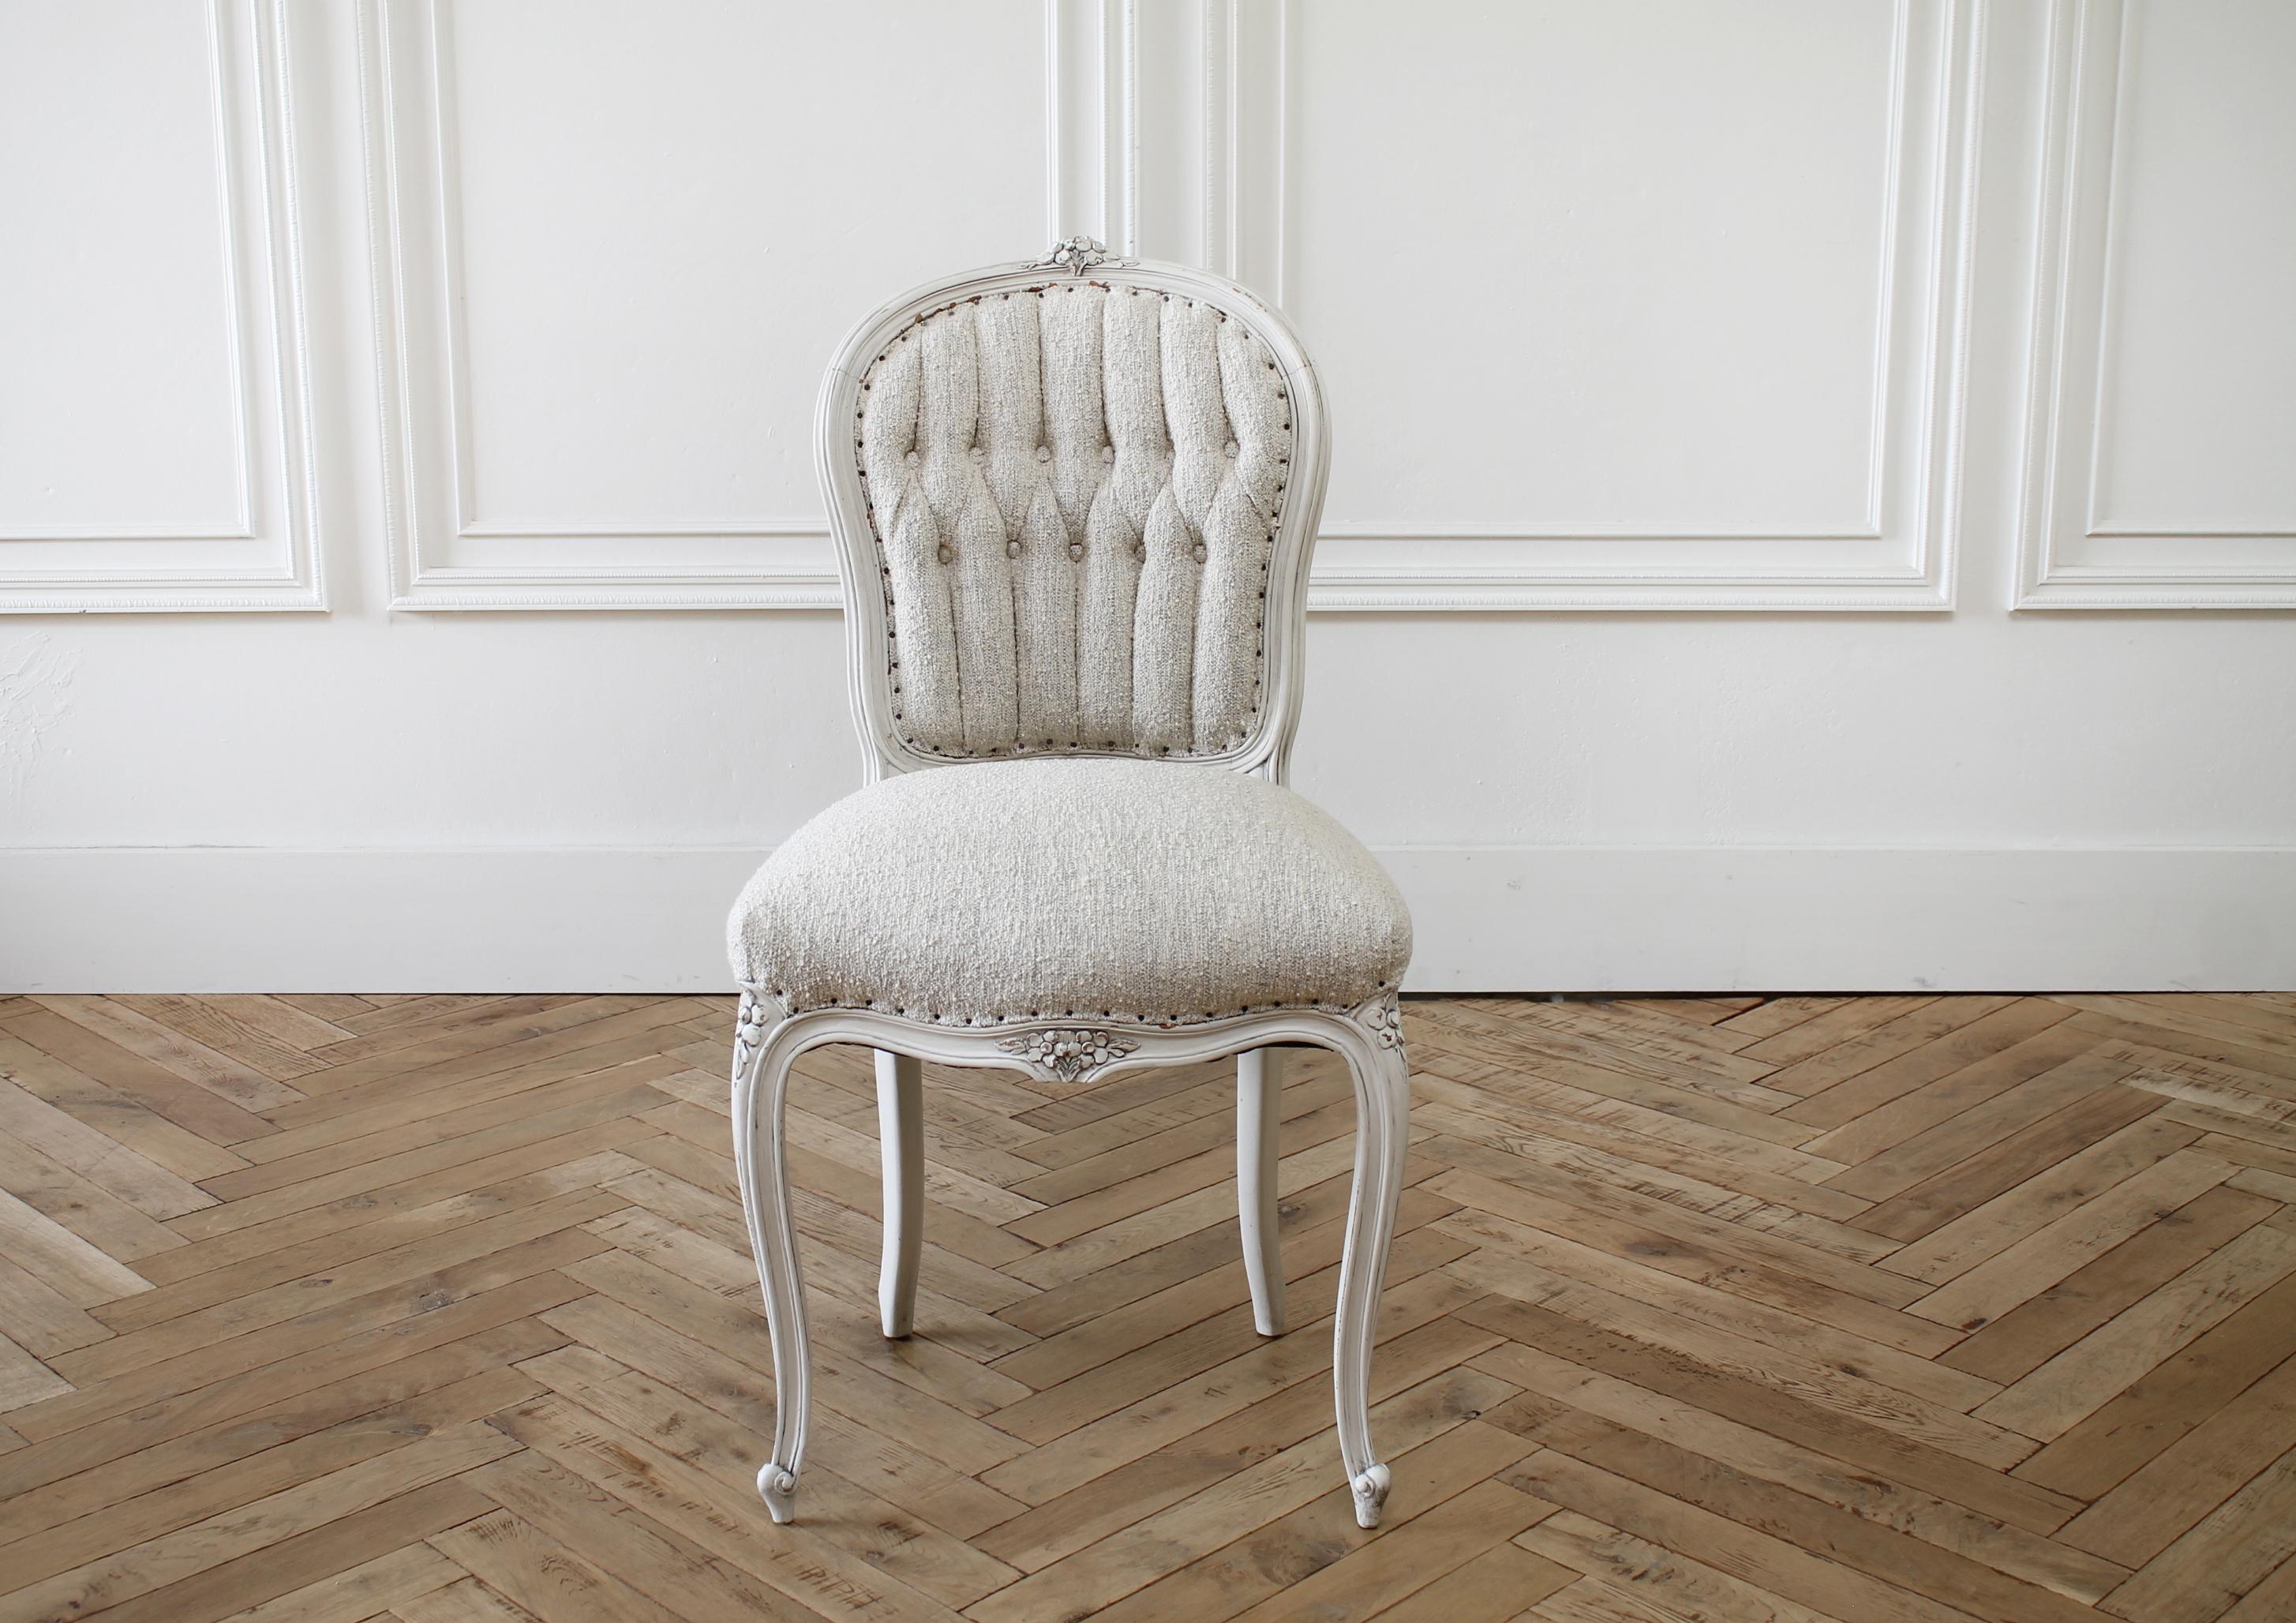 19th century Louis XV style vanity chair in boucle fabric
Painted in our oyster white, with subtle distressed edges, and finished with an antique patina.
Brand new upholstery in a beautiful vintage style boucle that has grey and natural tones